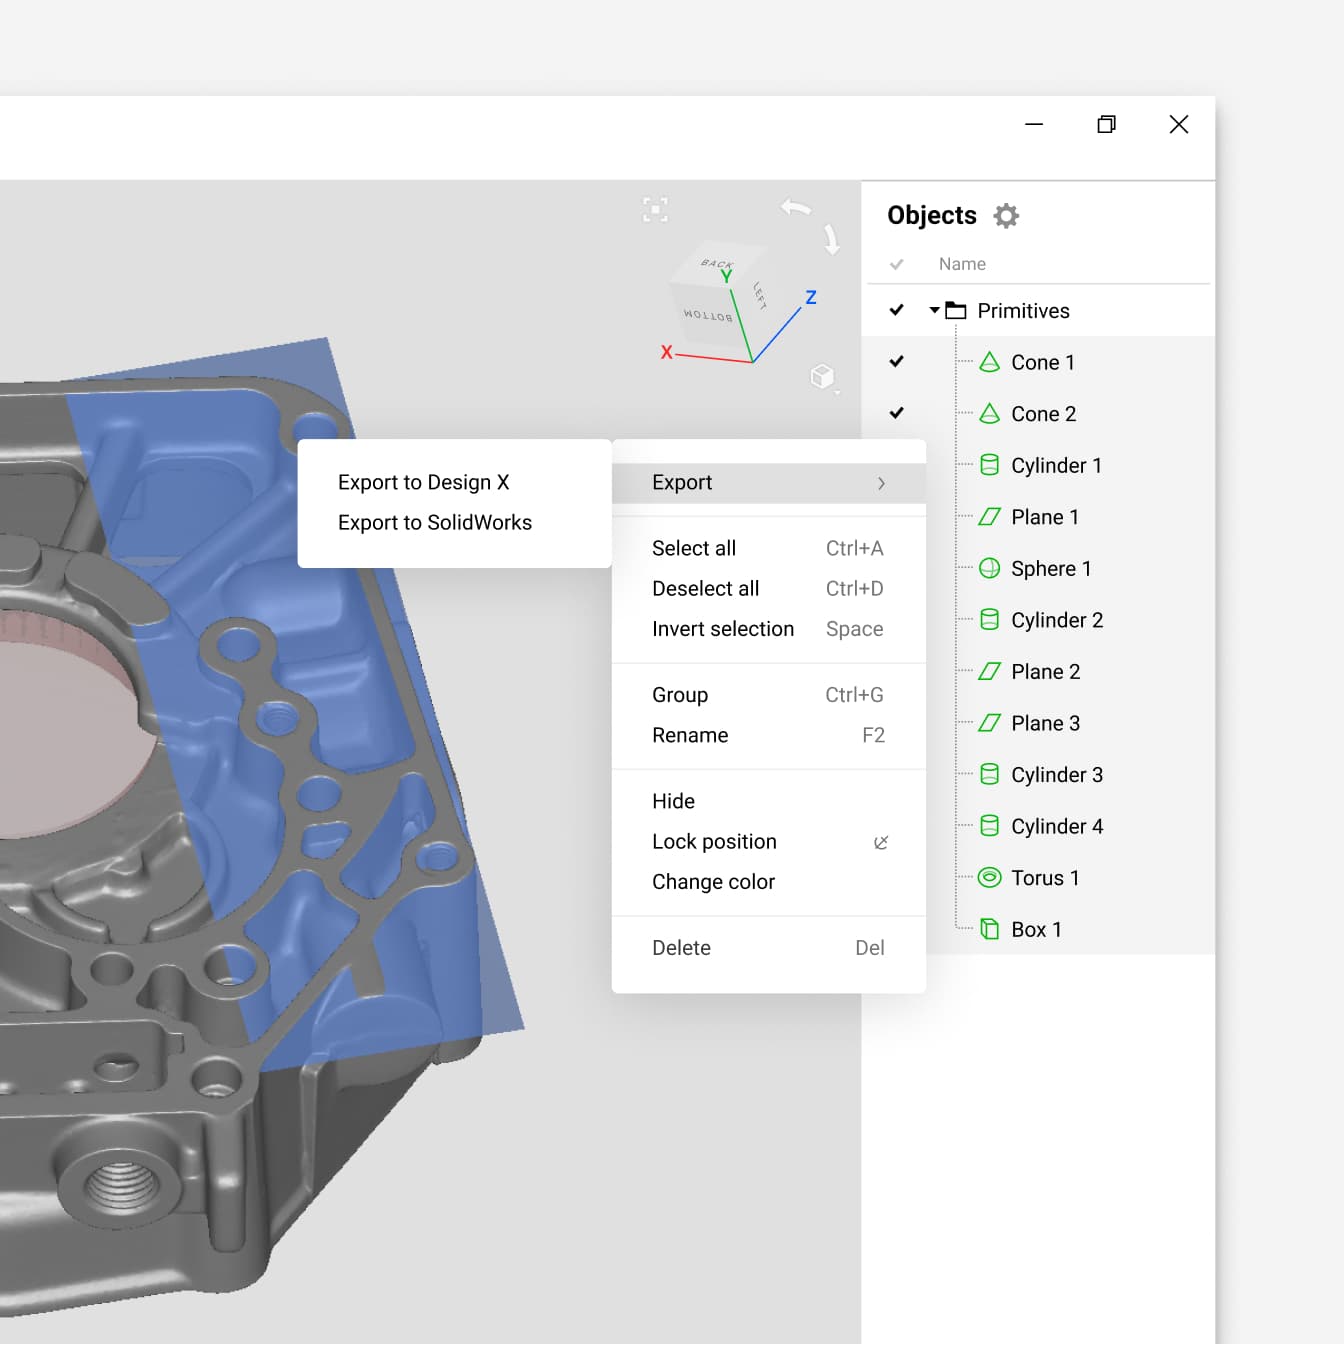 Direct integration with Design X and SOLIDWORKS for advanced manufacturing